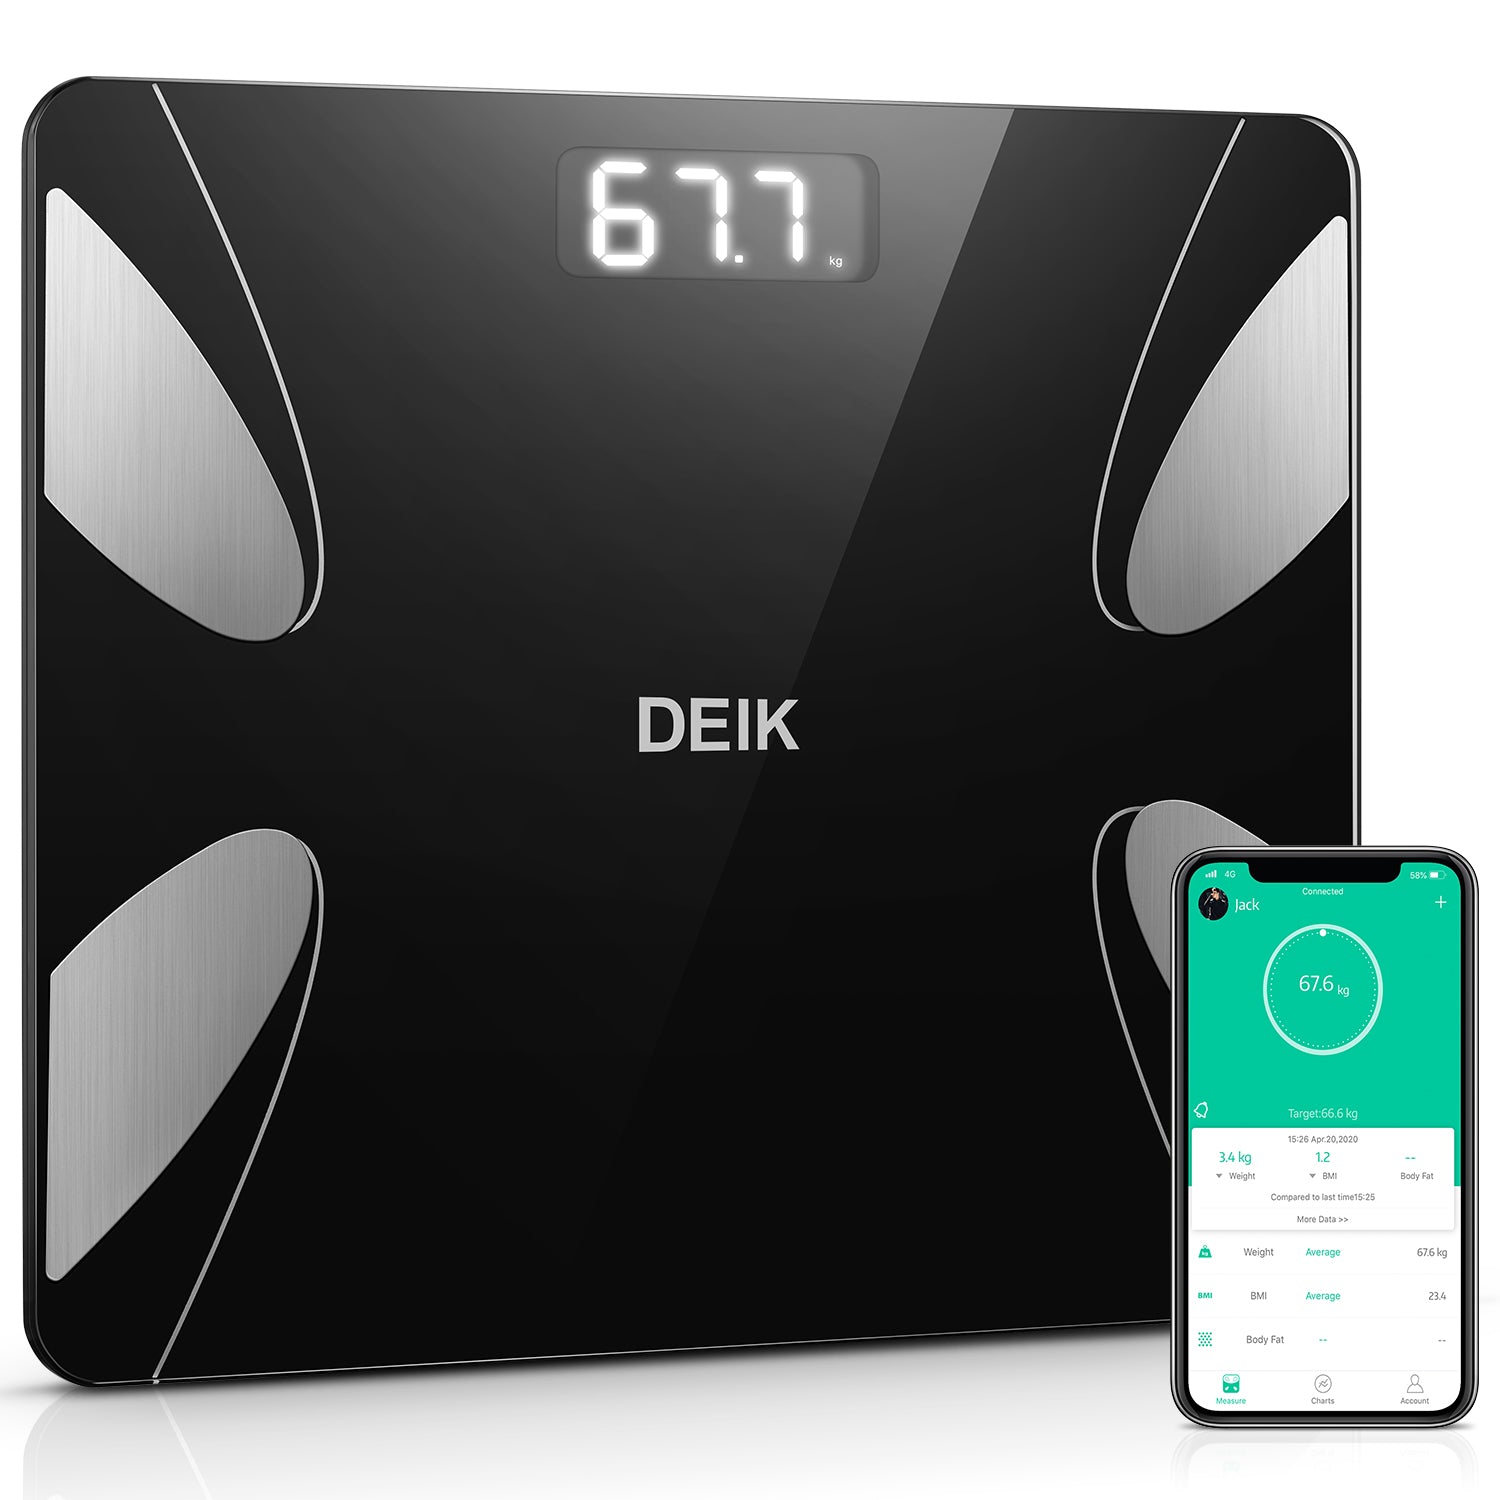 DEIK Body Fat Scale, High Accurate Measurement Digital Smart Bathroom Scale, Digital Bathroom Scale with Bluetooth by iOS and Android App, 13 Function Body Analysis